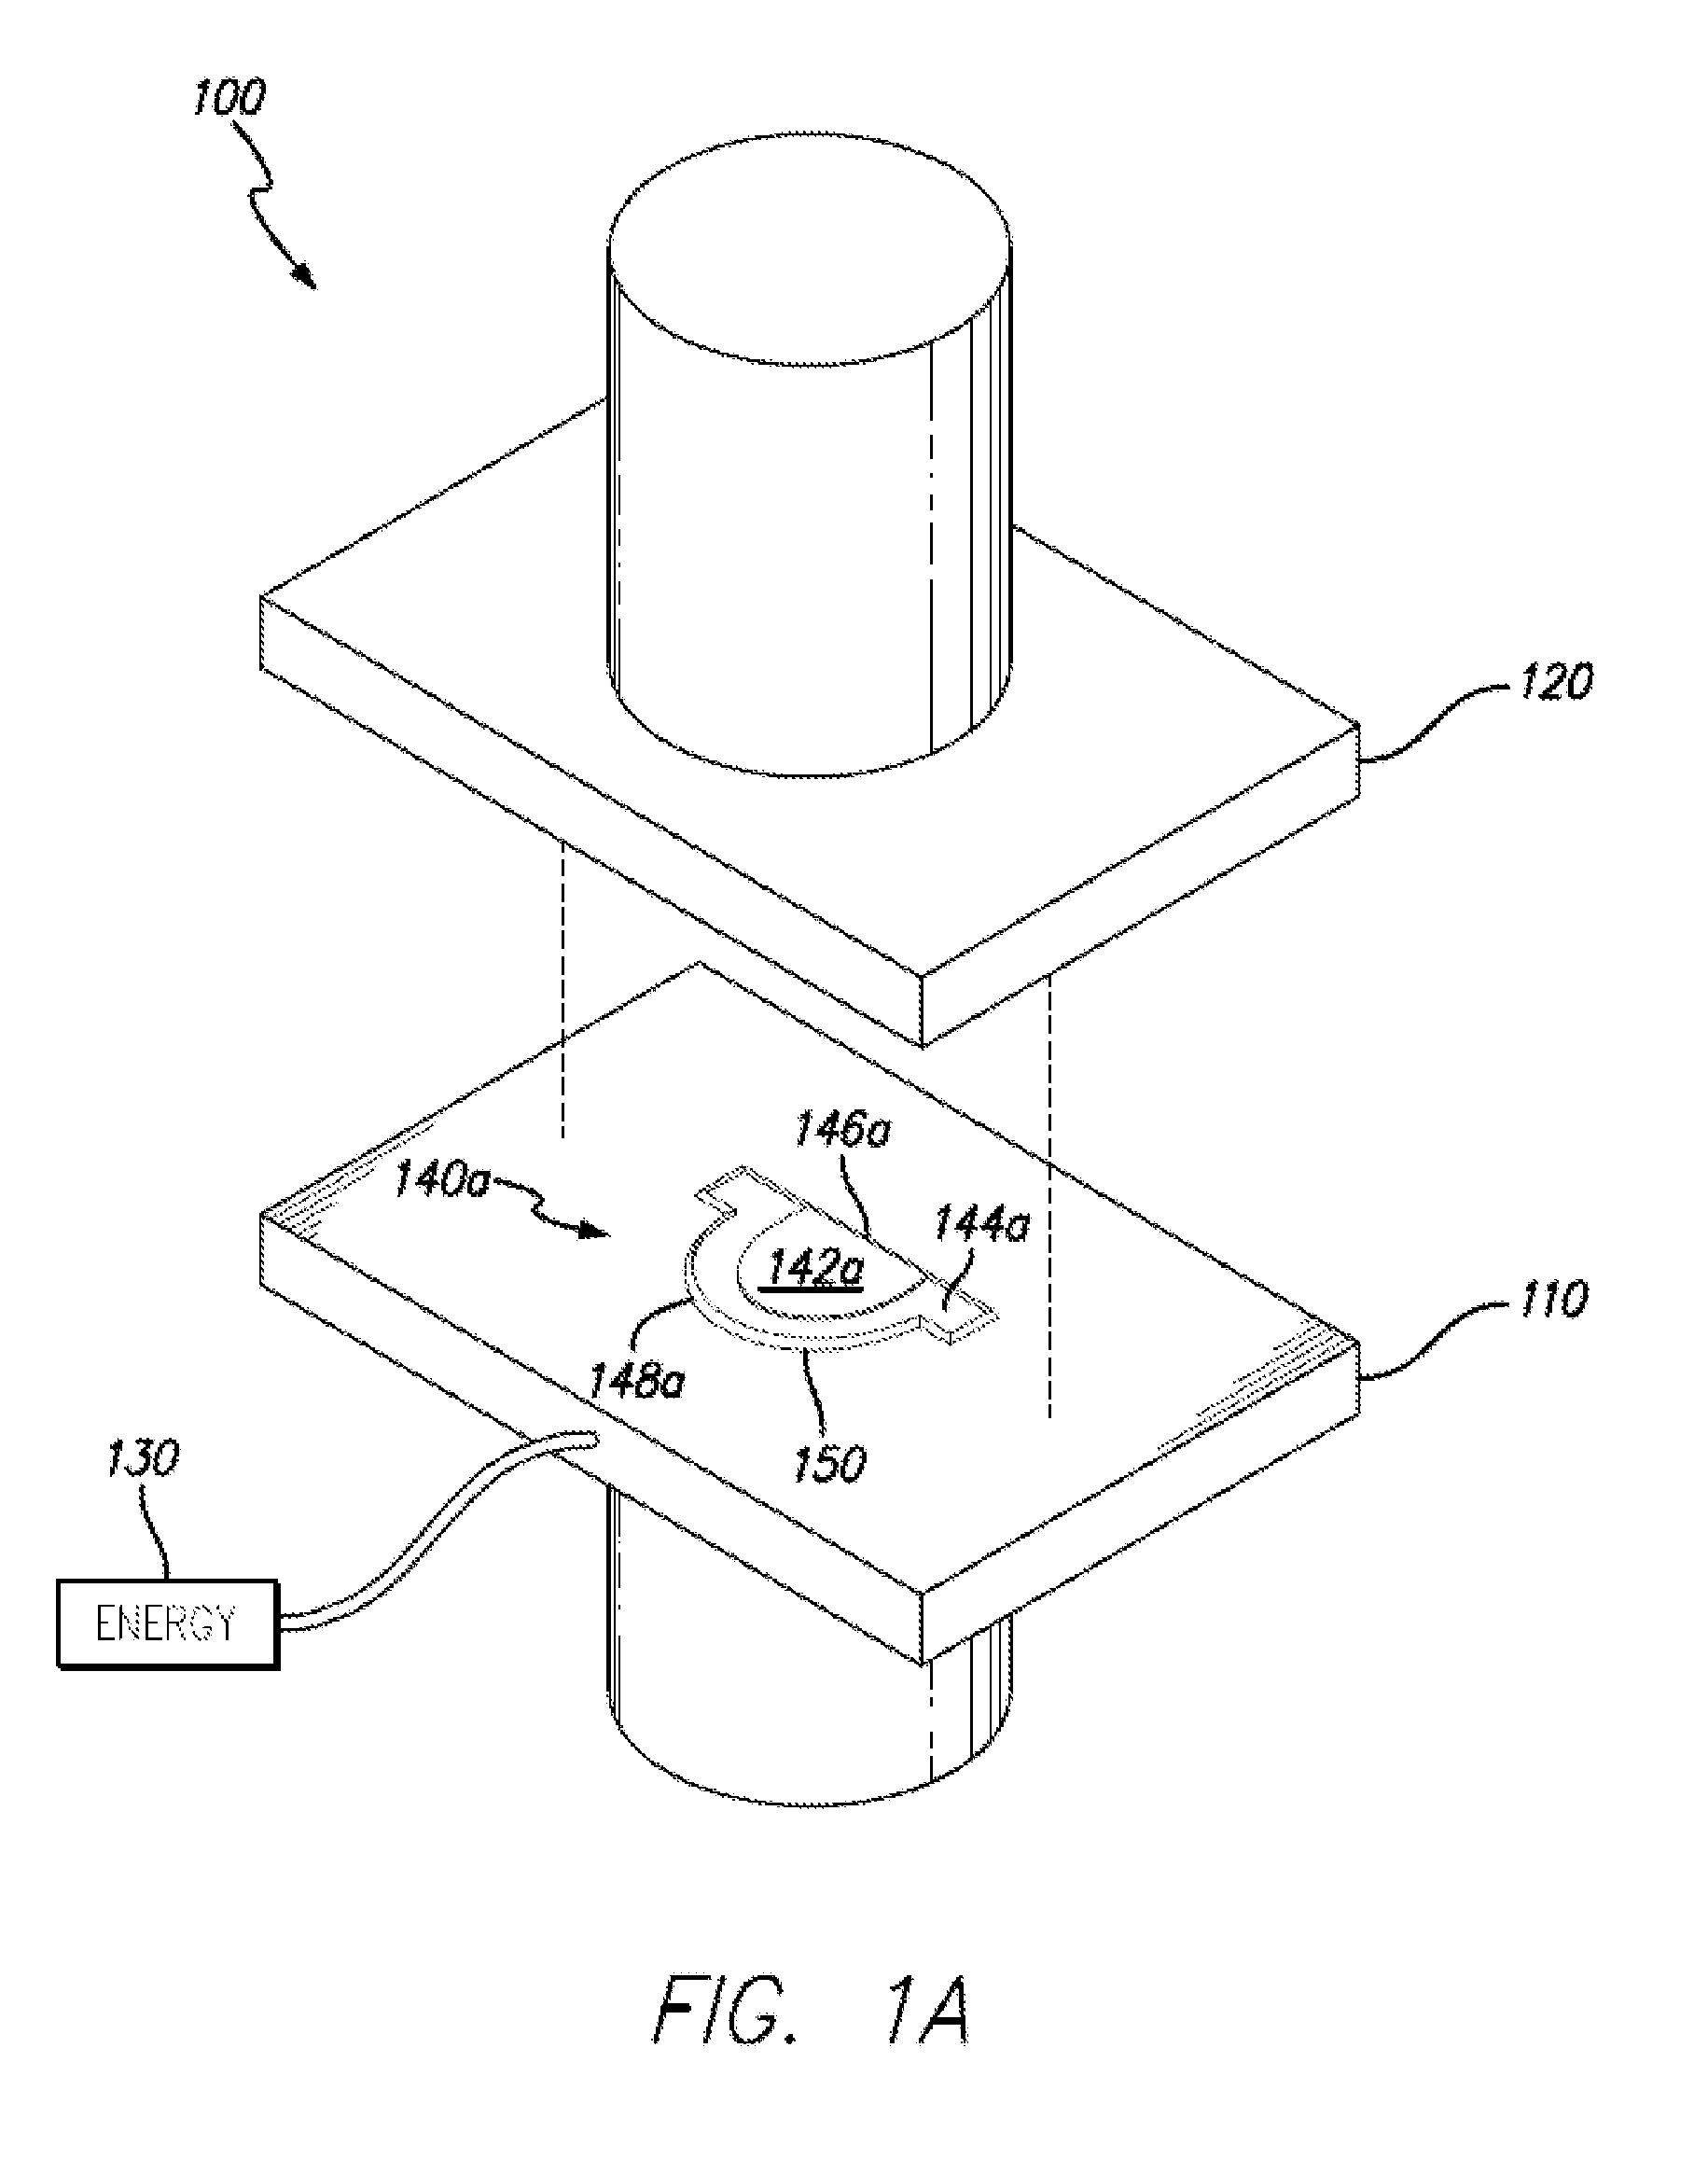 Method and apparatus for preparing a contoured biological tissue